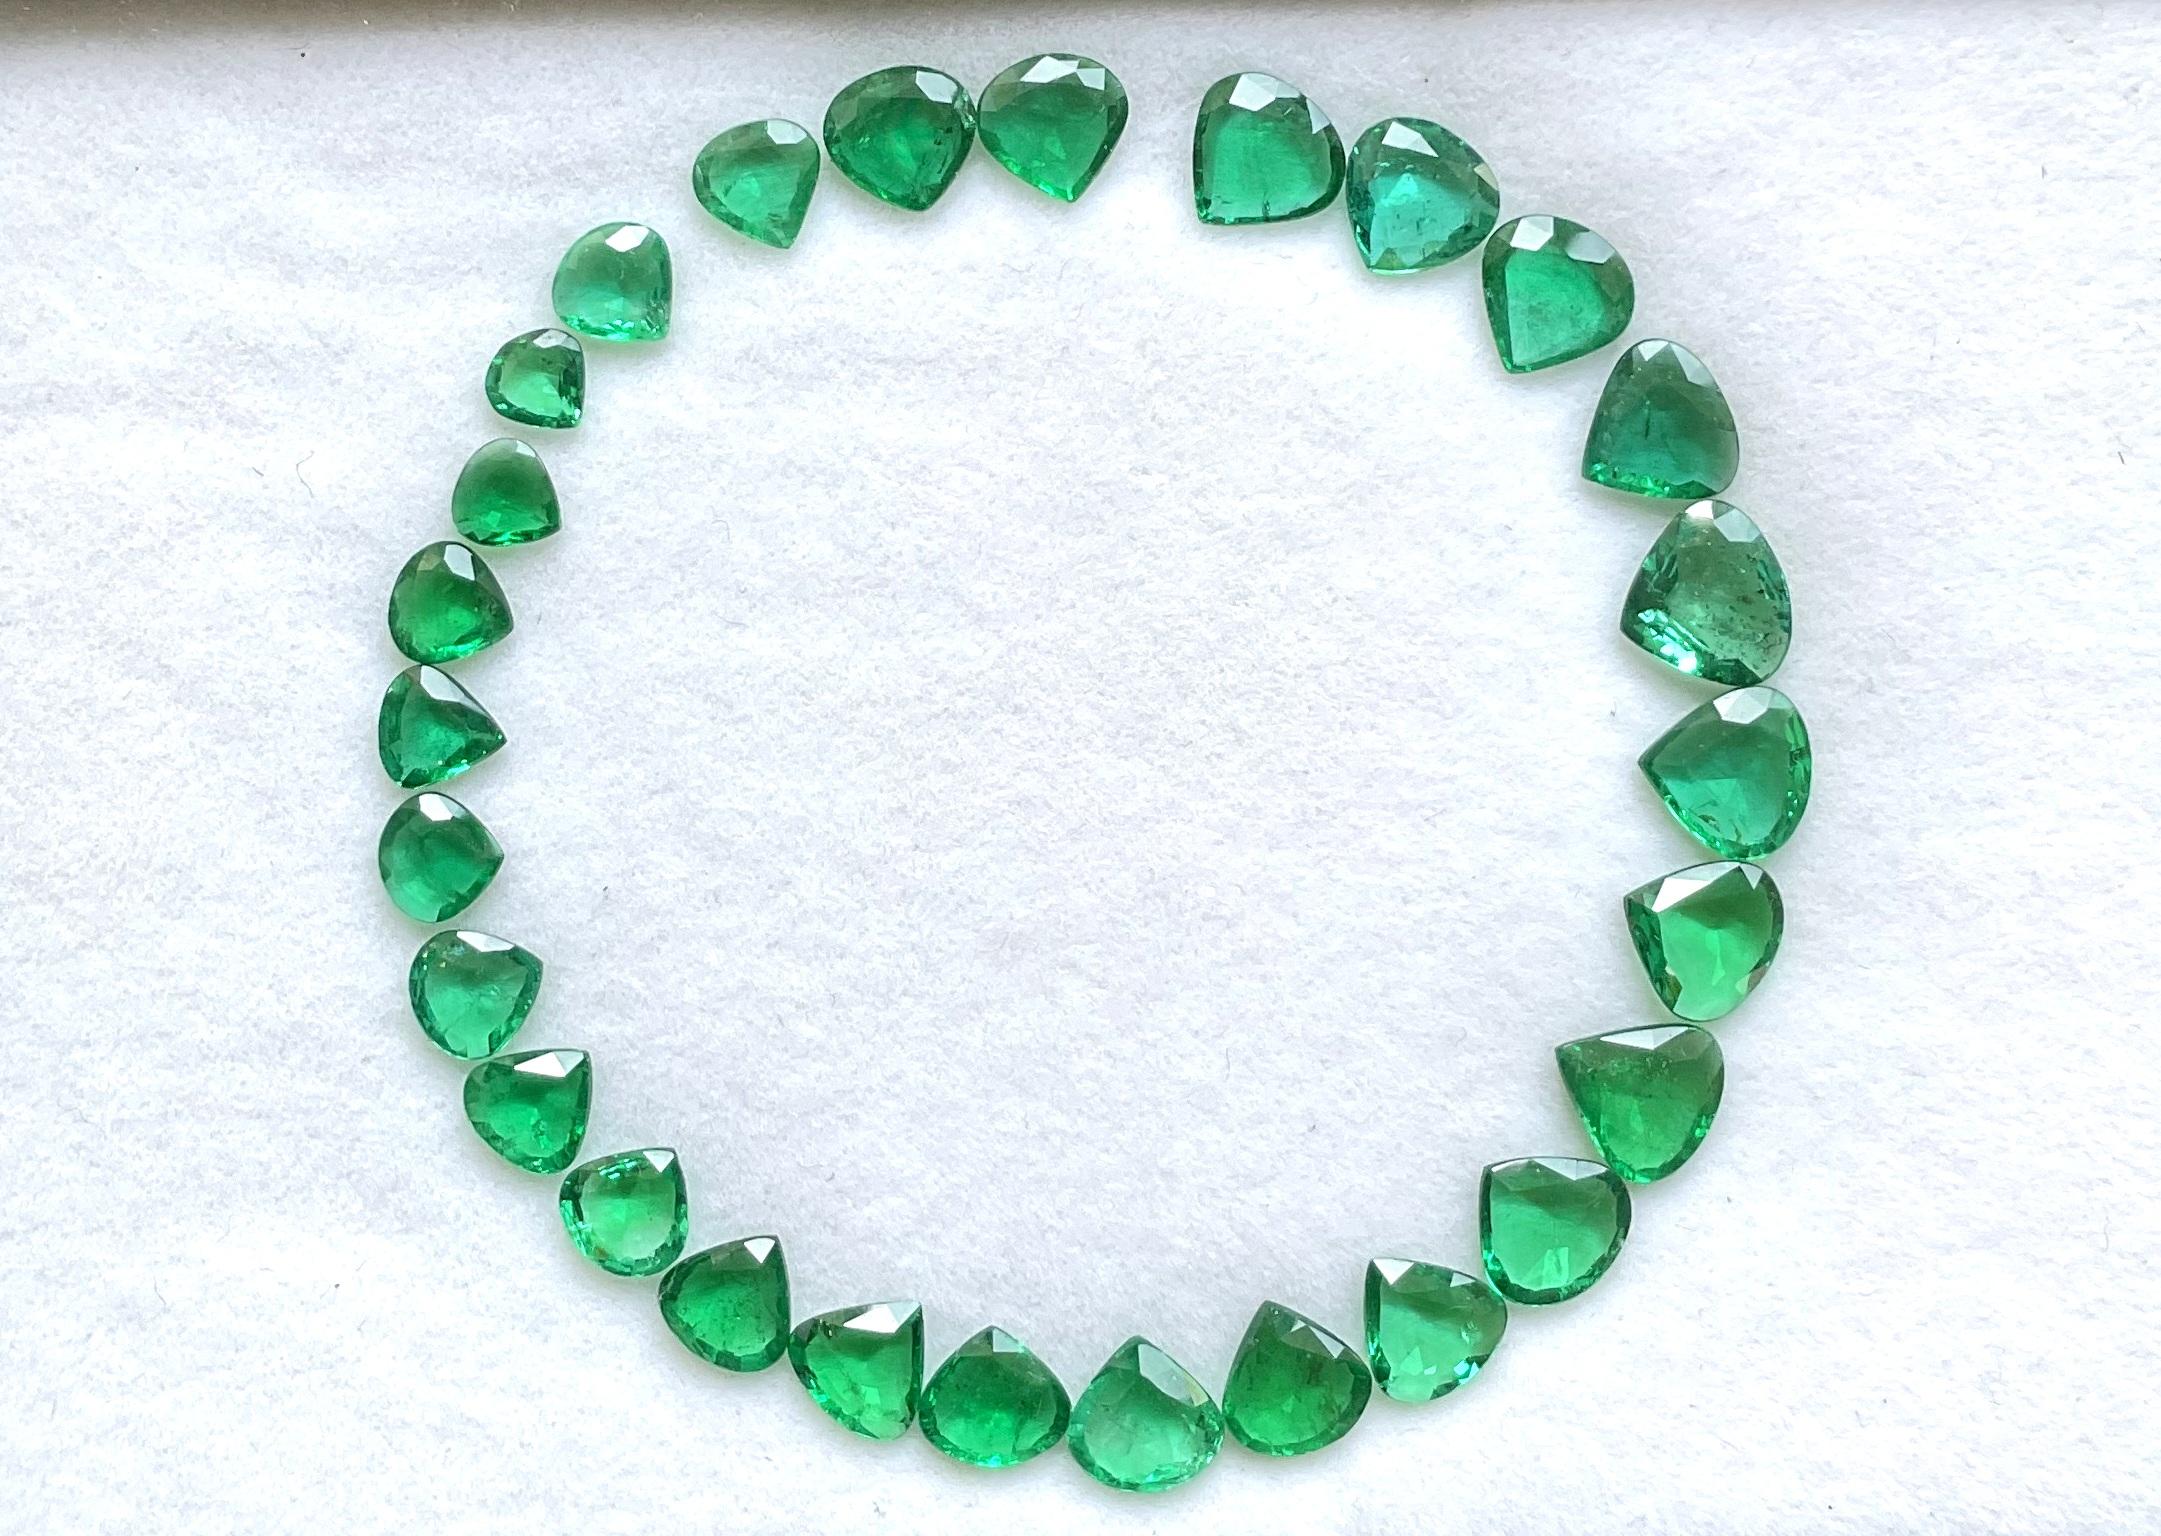 Zambian Emerald Heart Layout Suite Faceted Cut stone Loose Gemstone for Jewelry
Weight: 19.52 Carats
Size: 4x4 To 7x8 MM
Pieces: 27
Shape: Heart